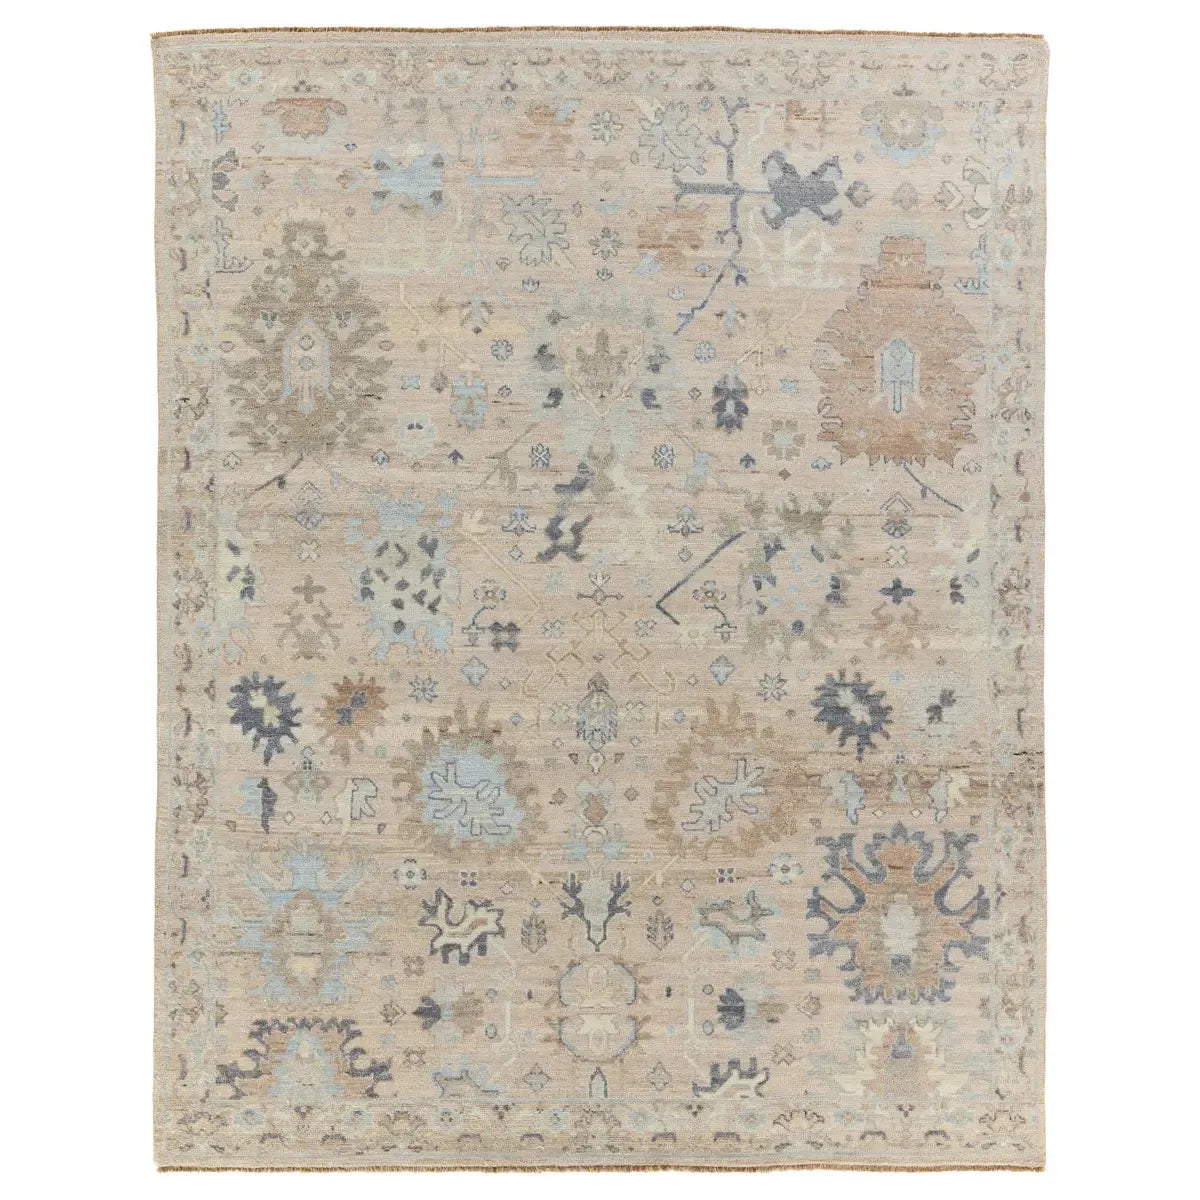 The Orenda collection features heirloom-quality designs of muted and uniquely updated Old World patterns. The Rivera area rug boasts a beautiful Oriental motif with abstract floral details. Amethyst Home provides interior design services, furniture, rugs, and lighting in the Kansas City metro area.